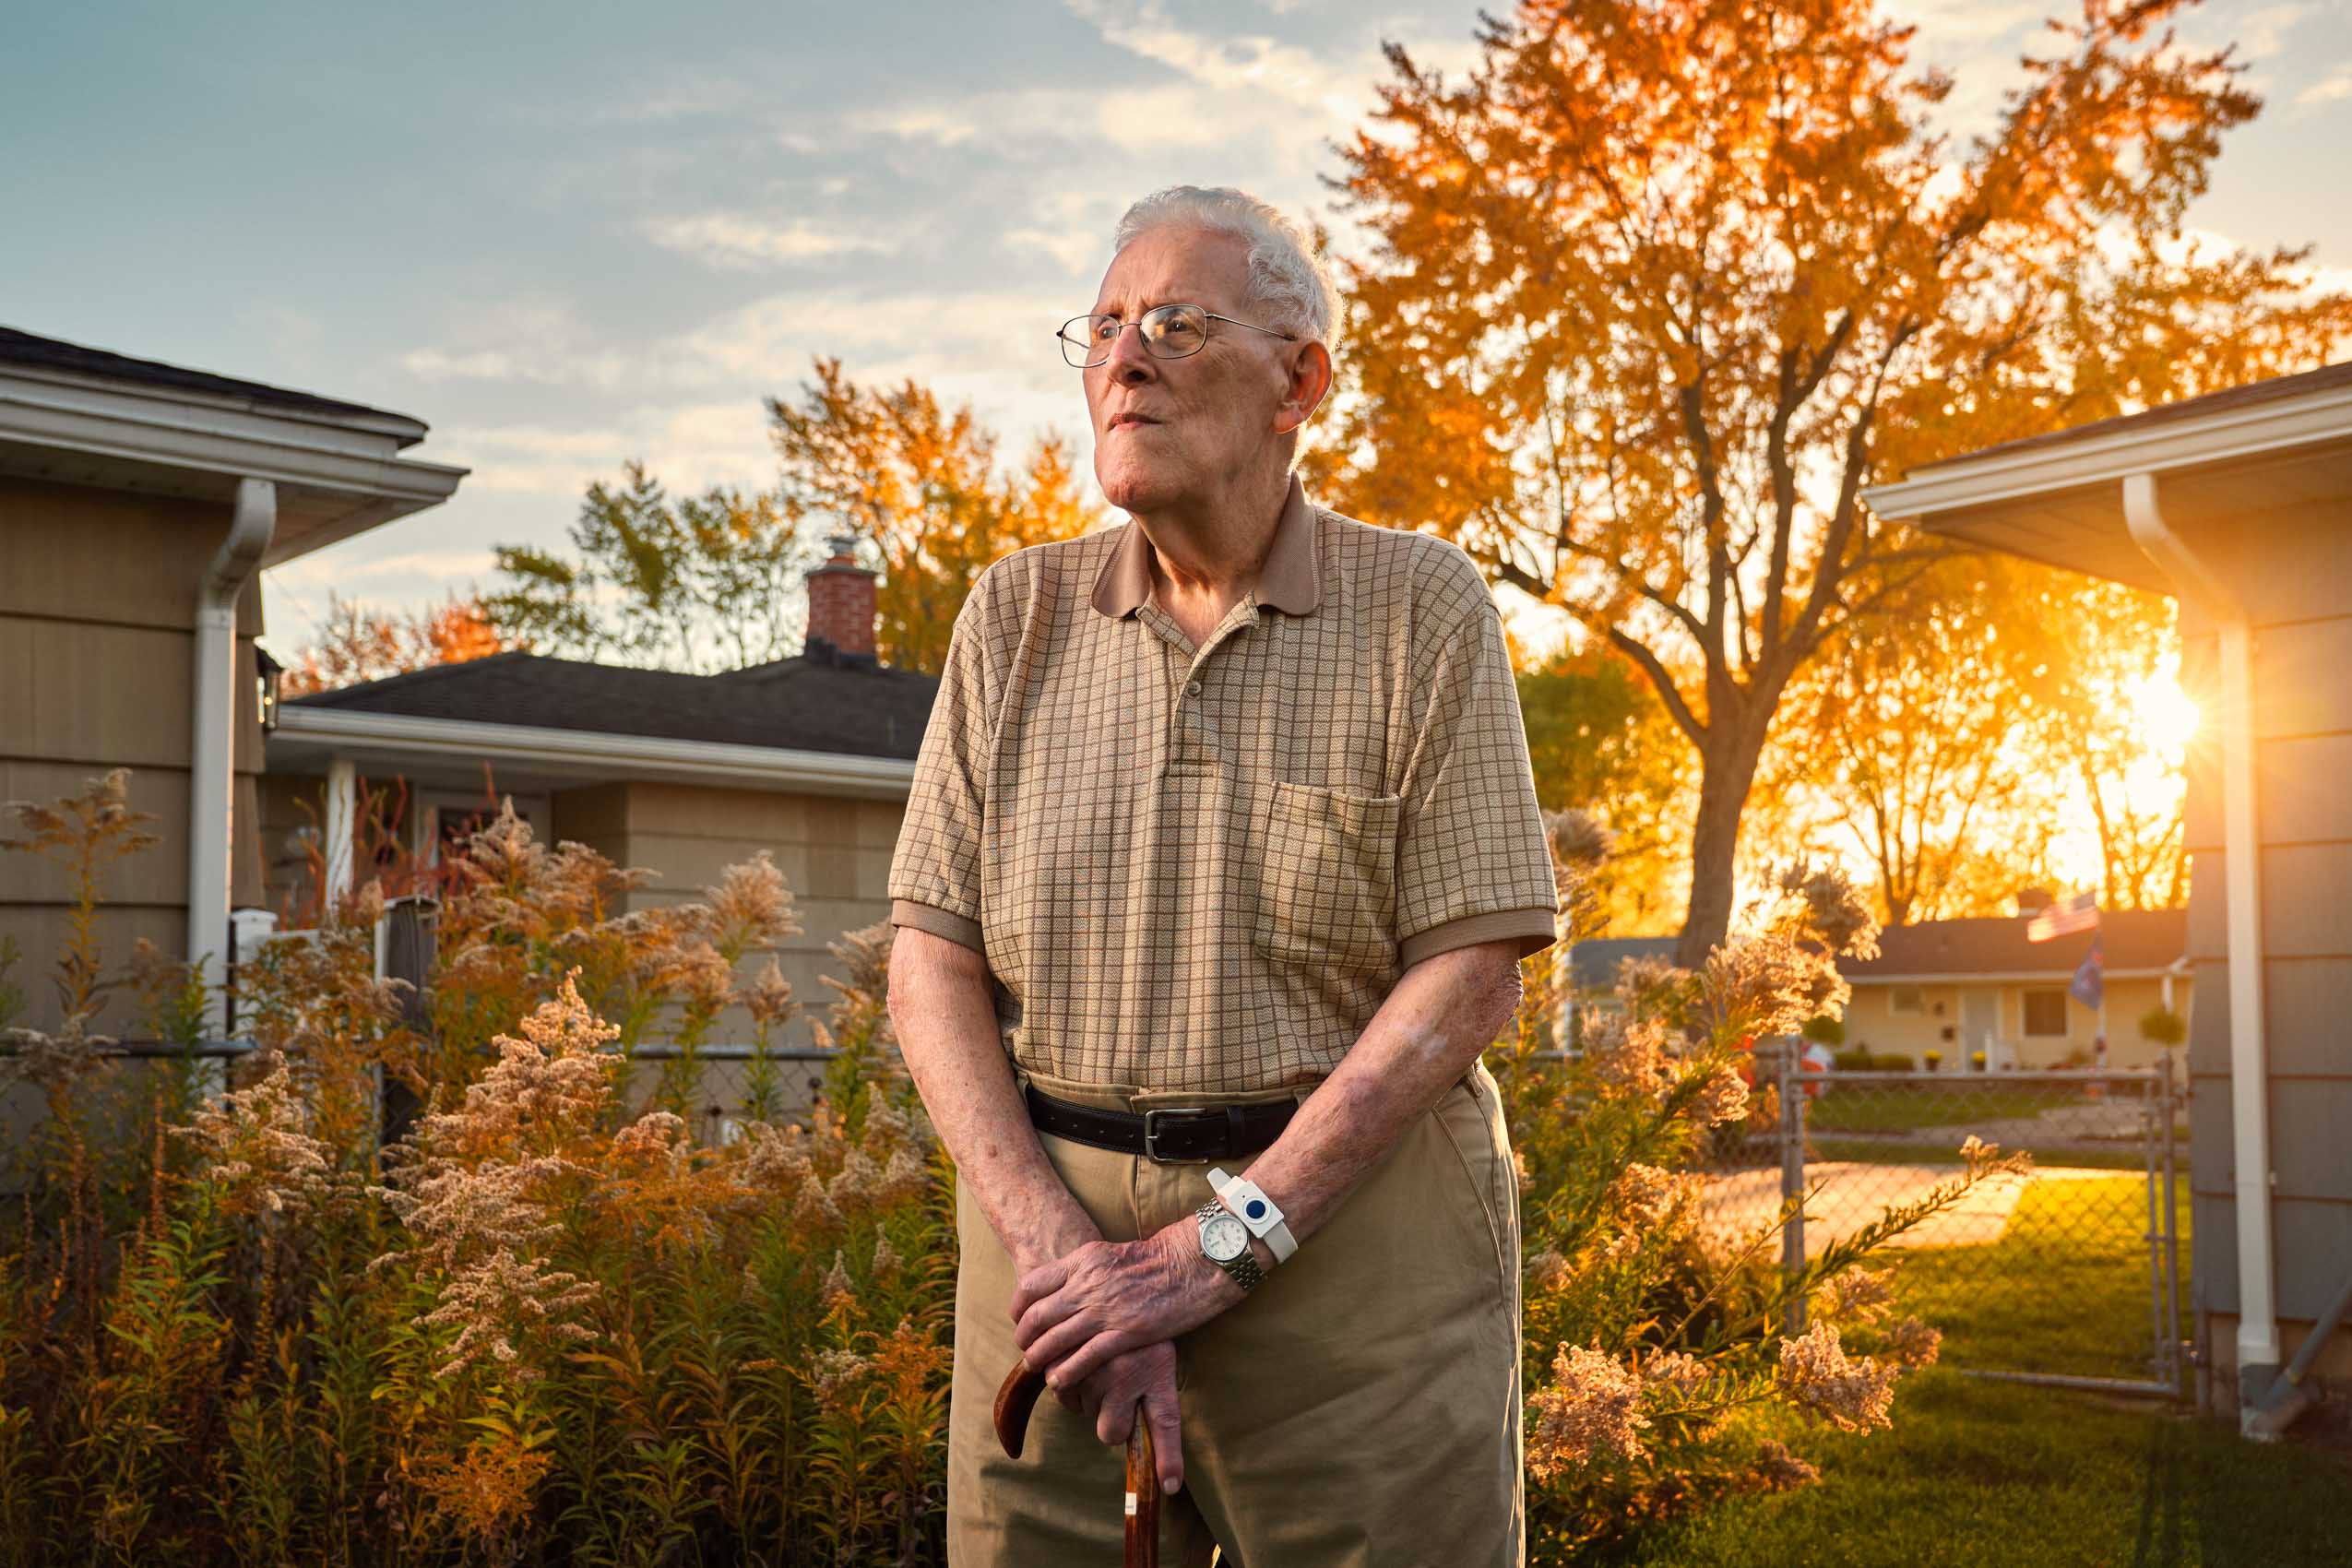 Jim Maier poses in his backyard during an autumn sunset in BUffalo Ny